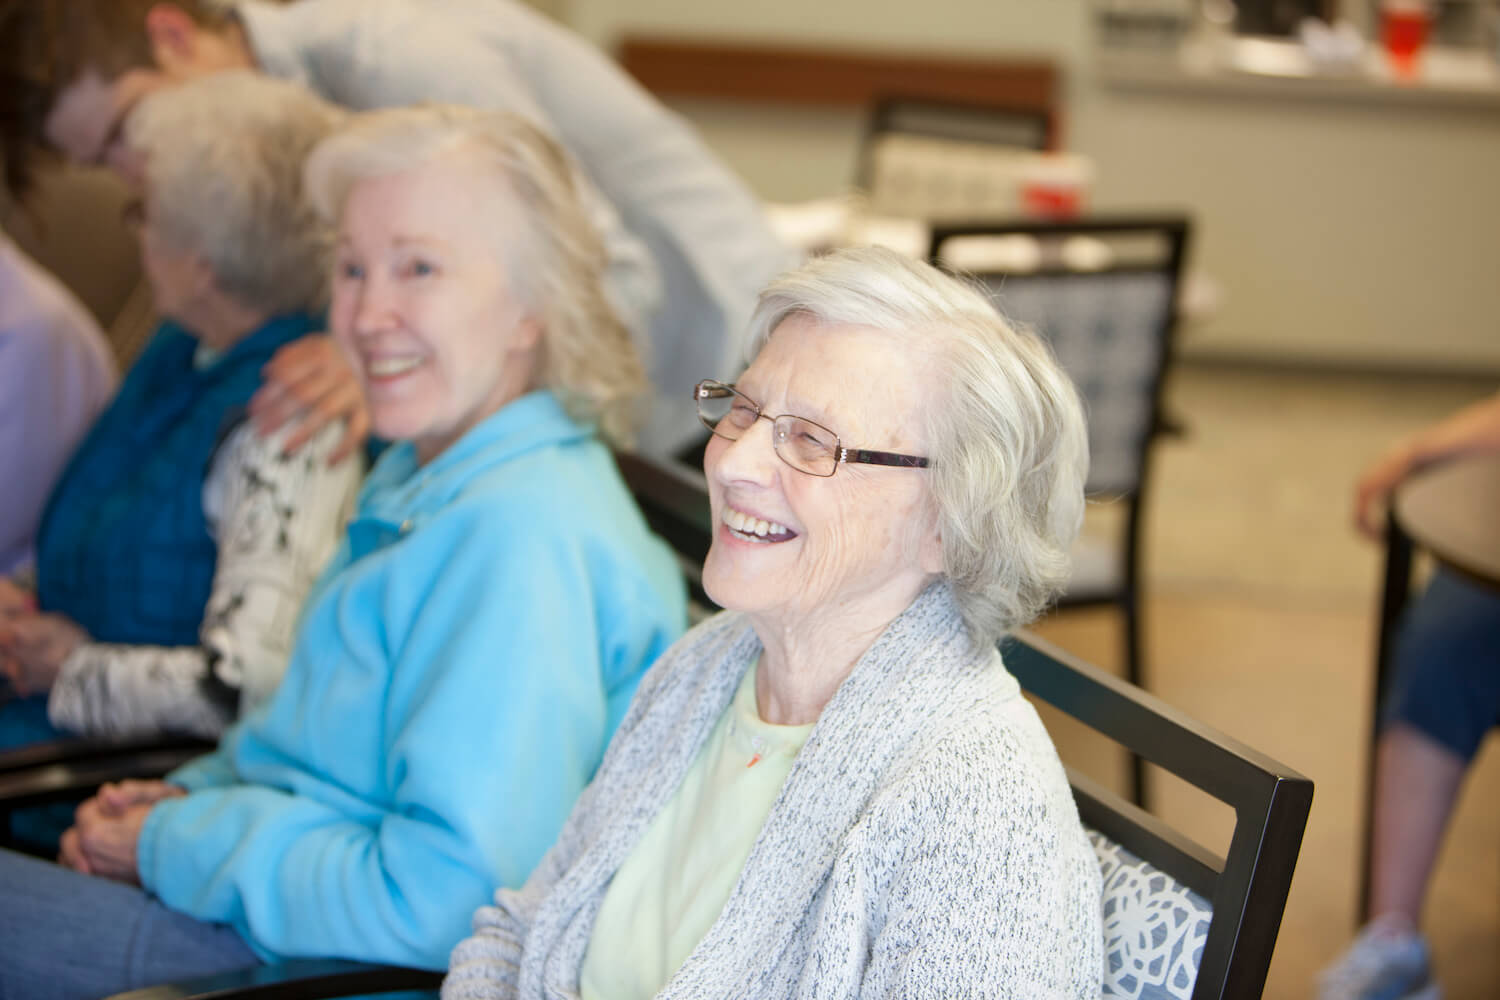 Residents smiling together in a dining room